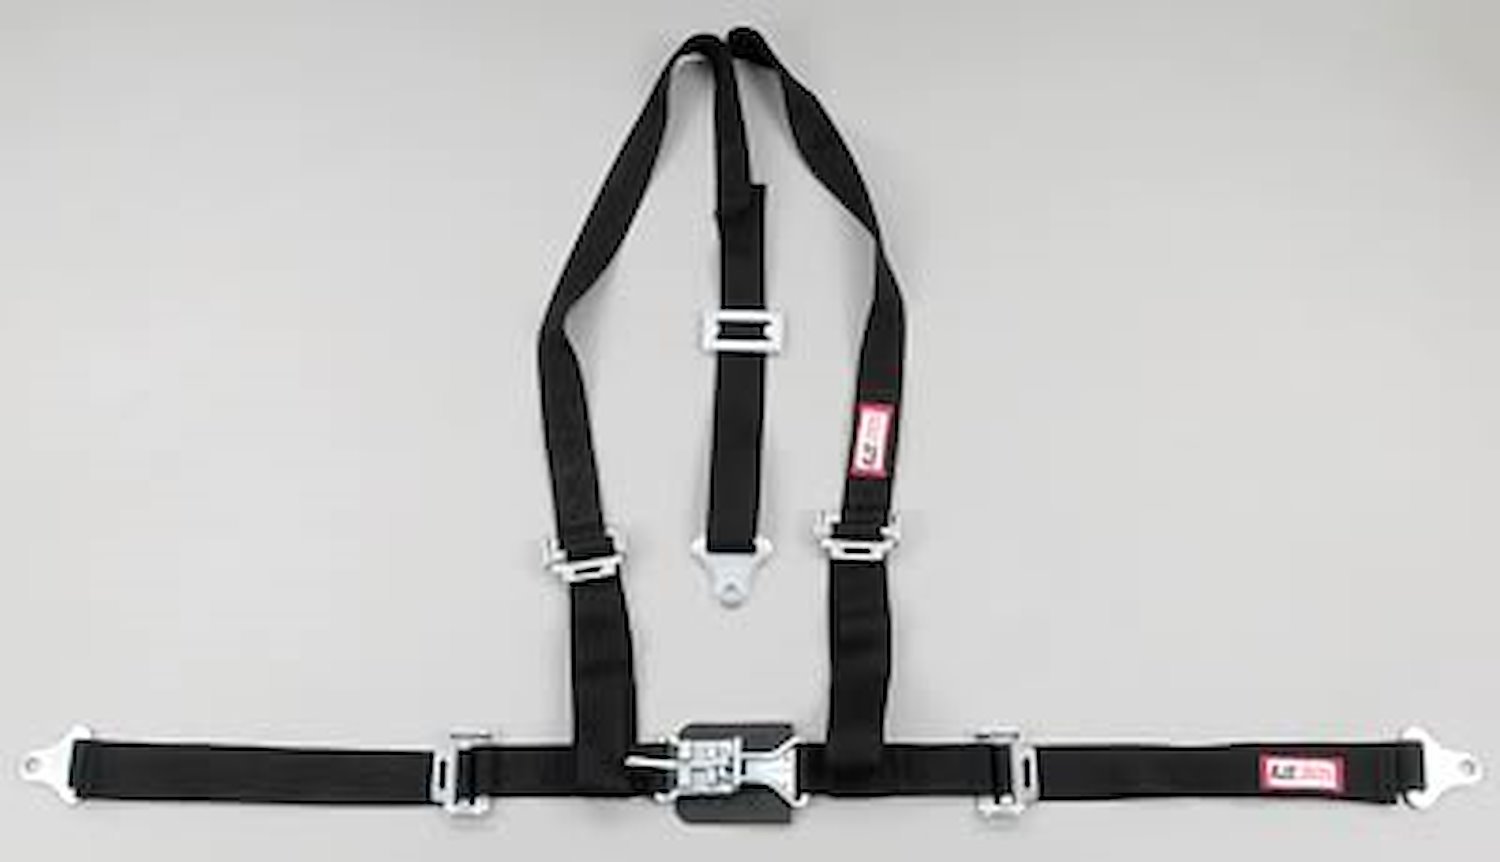 NON-SFI L&L HARNESS 2 PULL UP Lap Belt SEWN IN 2 S.H. V ROLL BAR Mount w/STERNUM STRAP ALL SNAP ENDS ORANGE